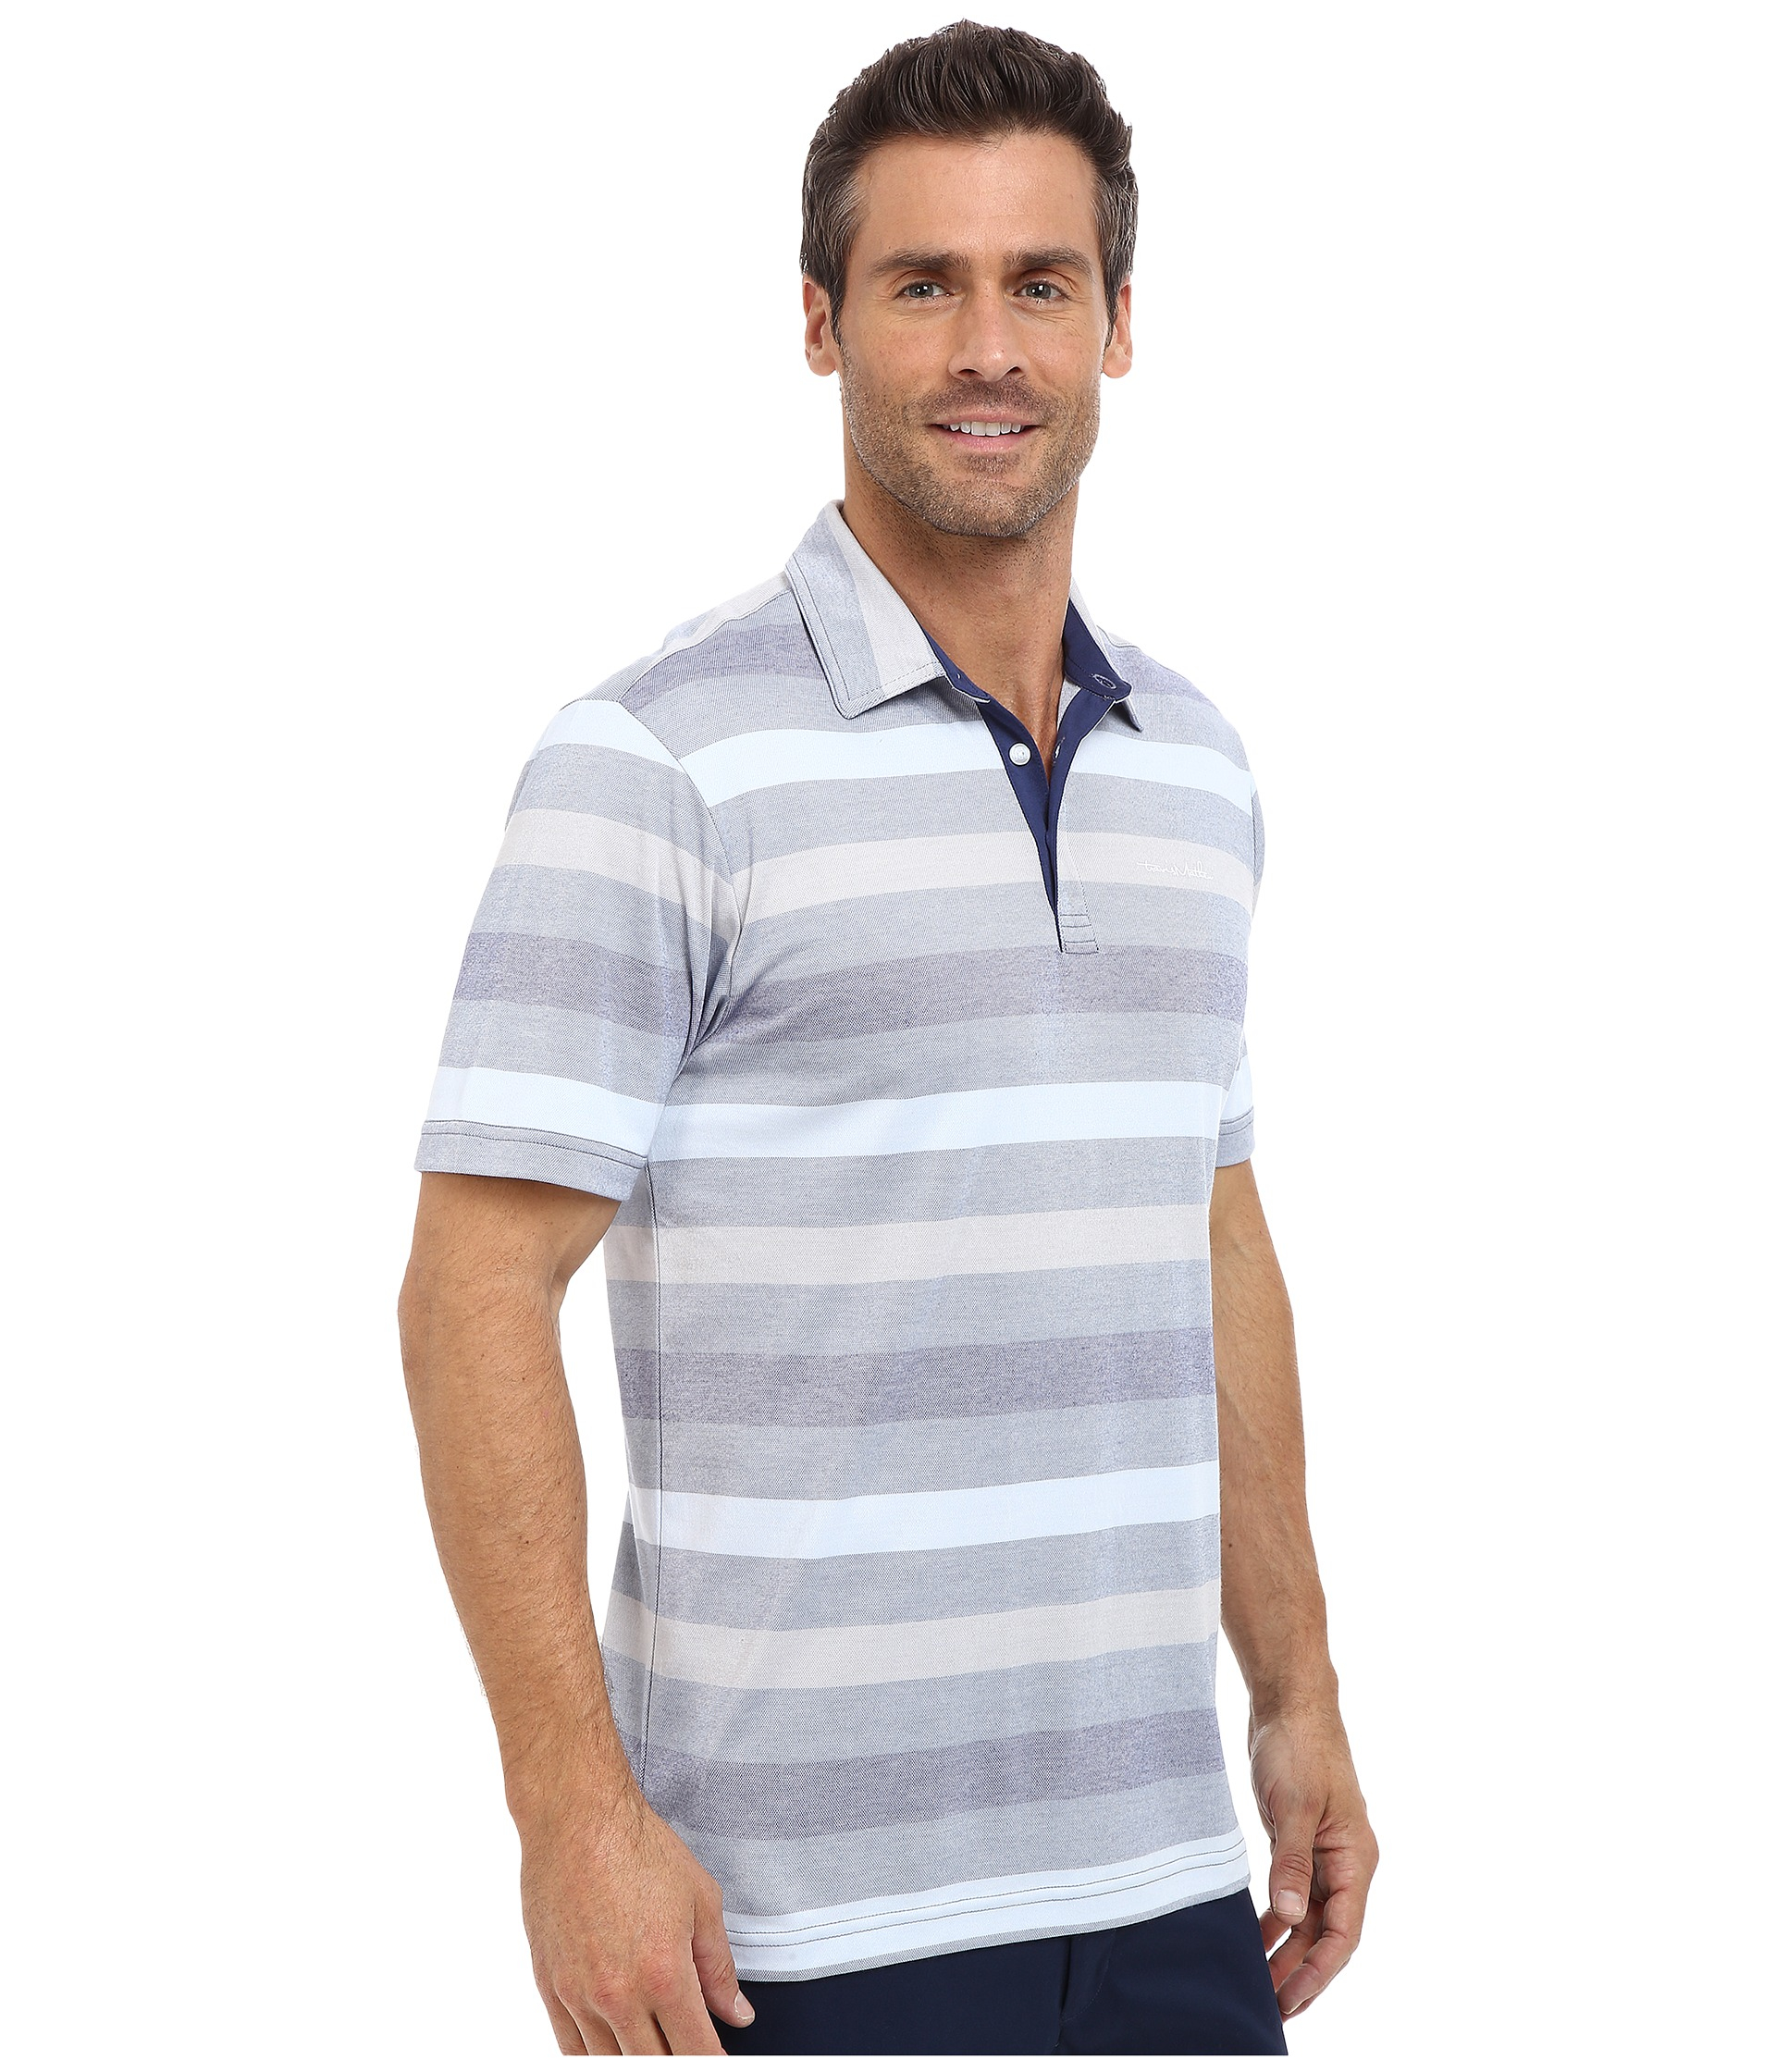 Lyst - Travis Mathew The Real Deal in Blue for Men